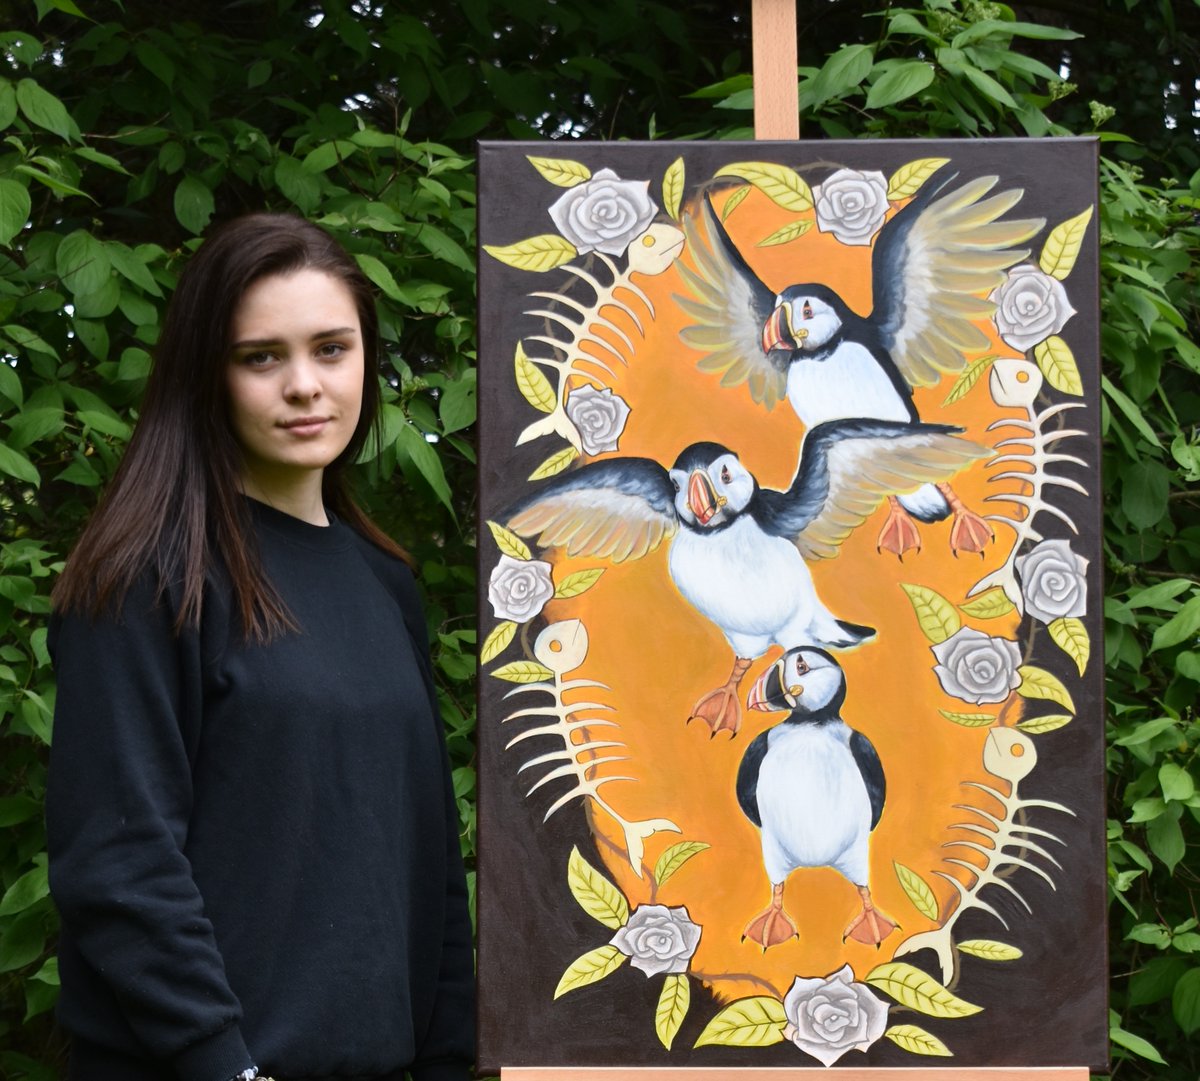 Repost from Erika S. (18, WI) our Bronze Award Winner in Senior Art! '#savethepuffins ! 🐧Puffin populations are decreasing at an alarming rate. Find out how to help puffins by visiting bowseat.org. Let’s keep our planet beautiful for years to come! 🌎✨🌿'